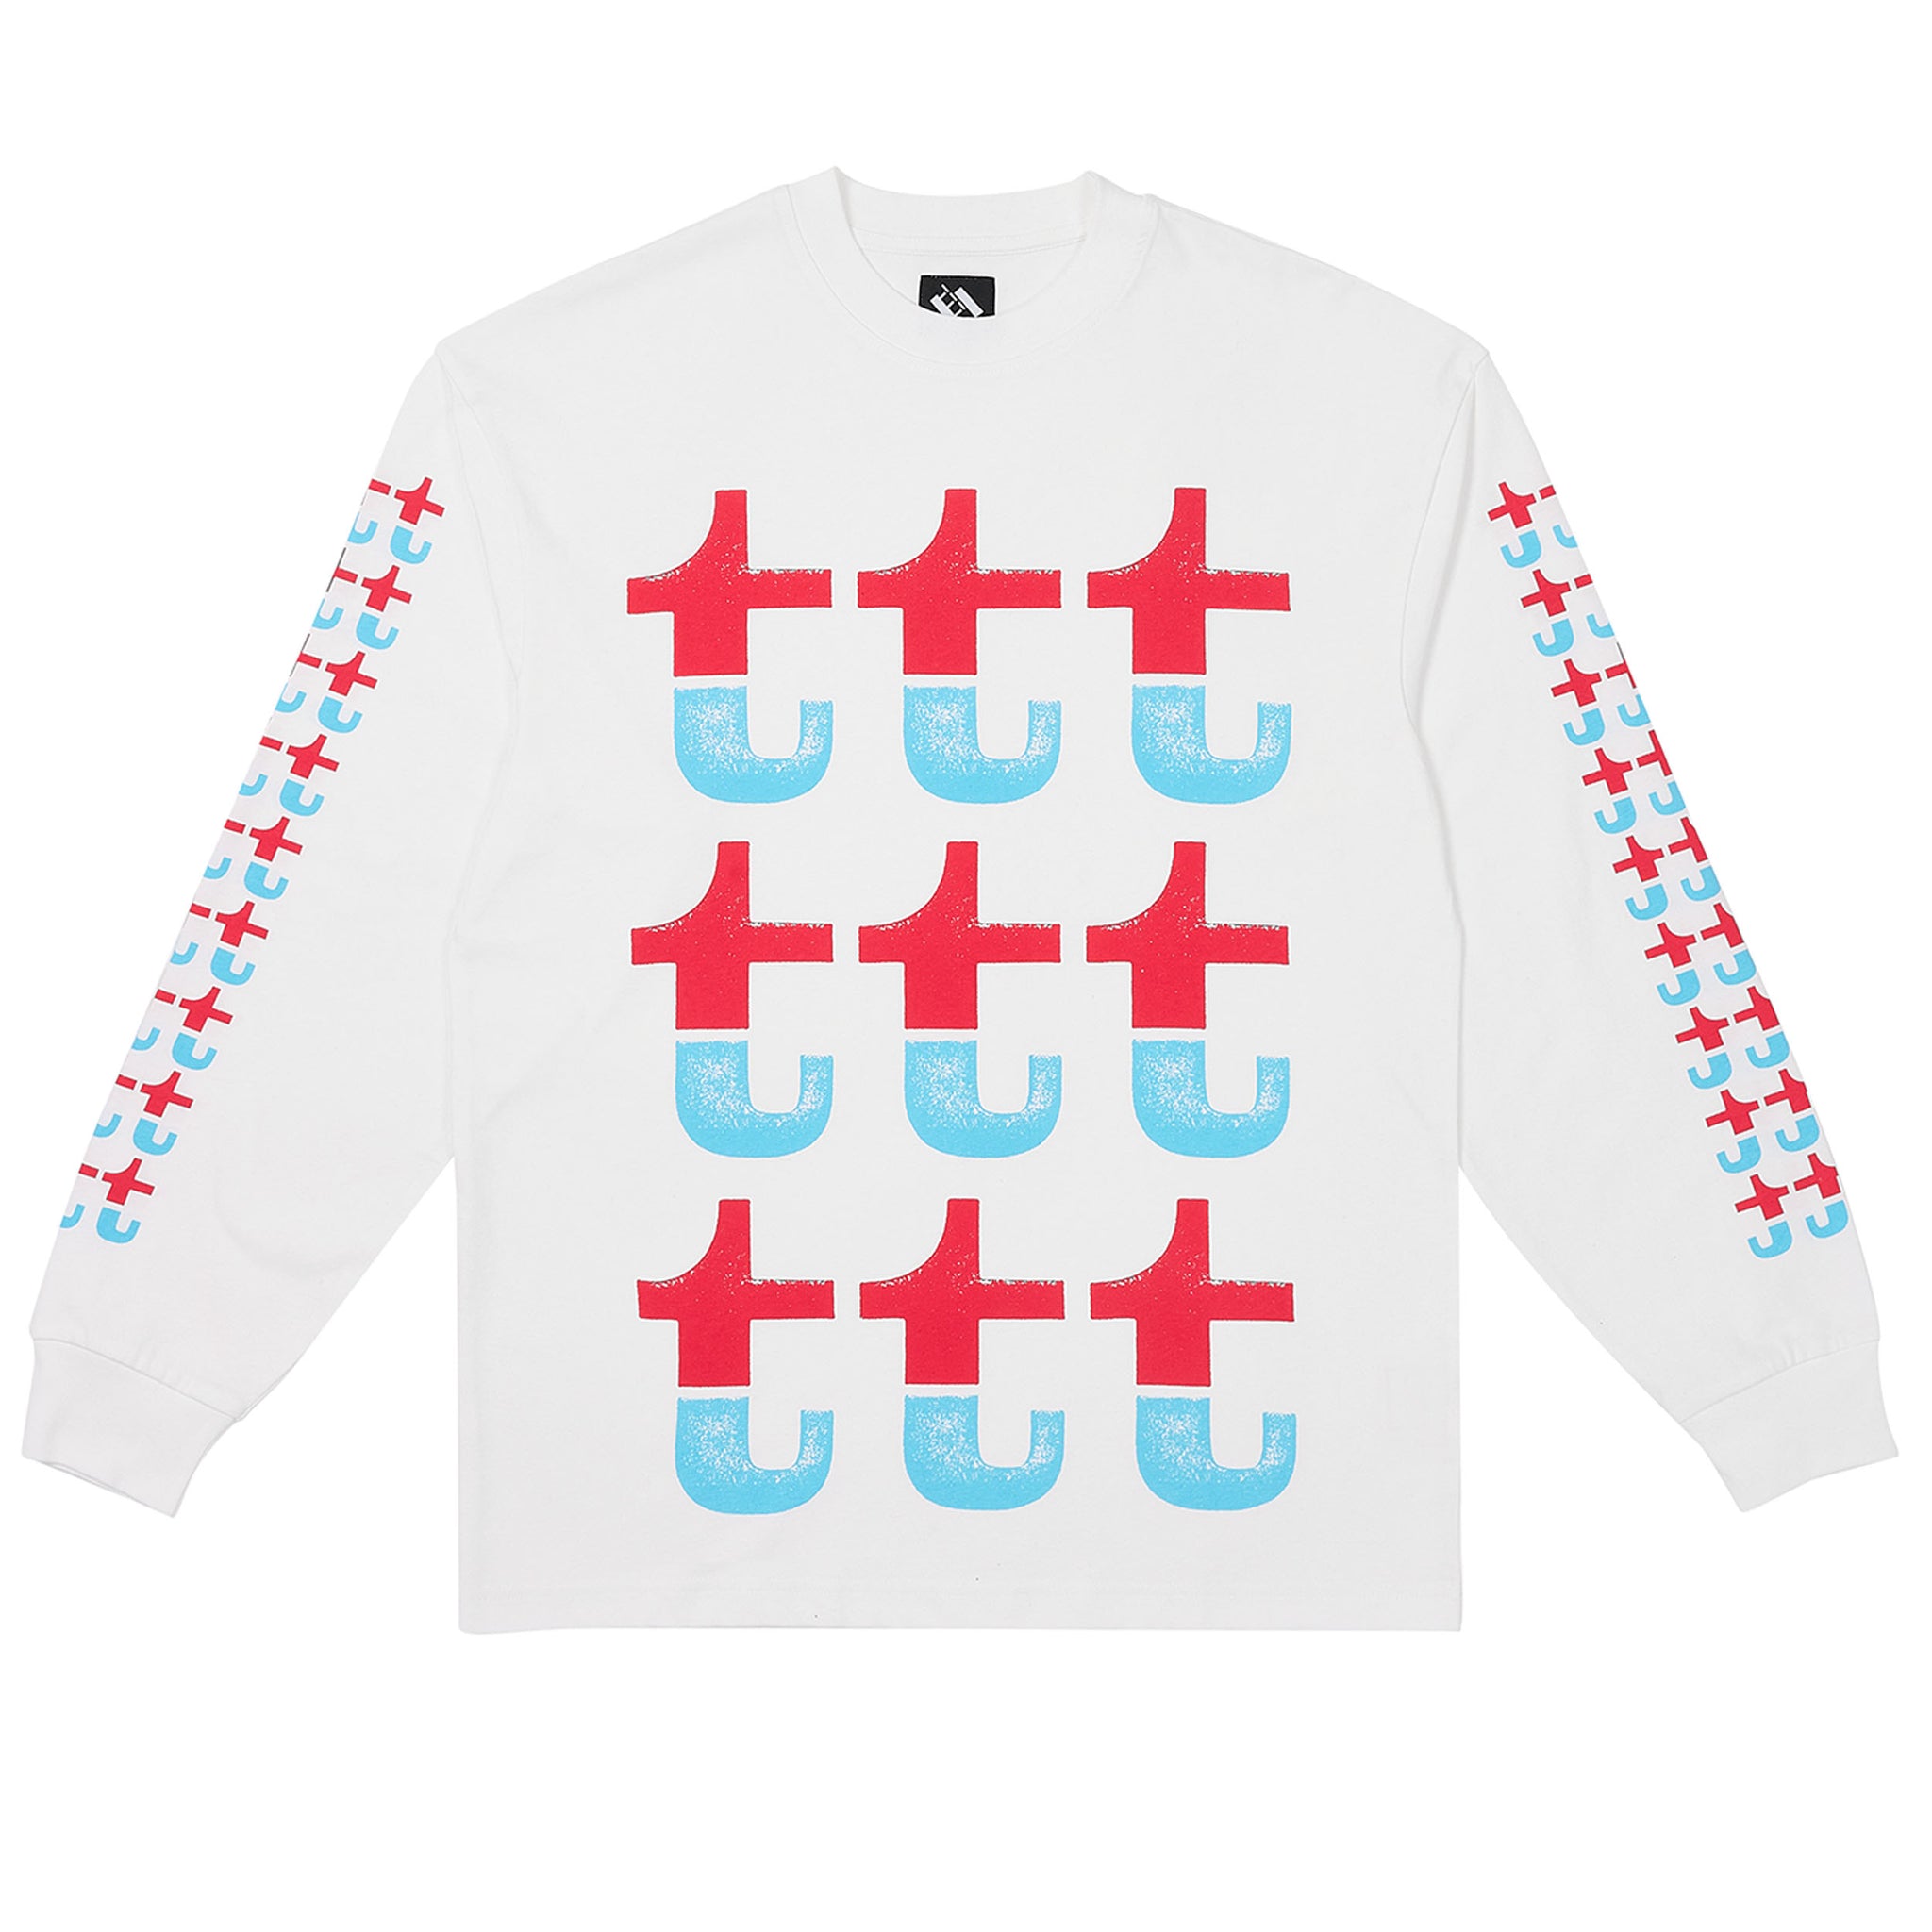 The Trilogy Tapes Red And Blue Split Longsleeve White